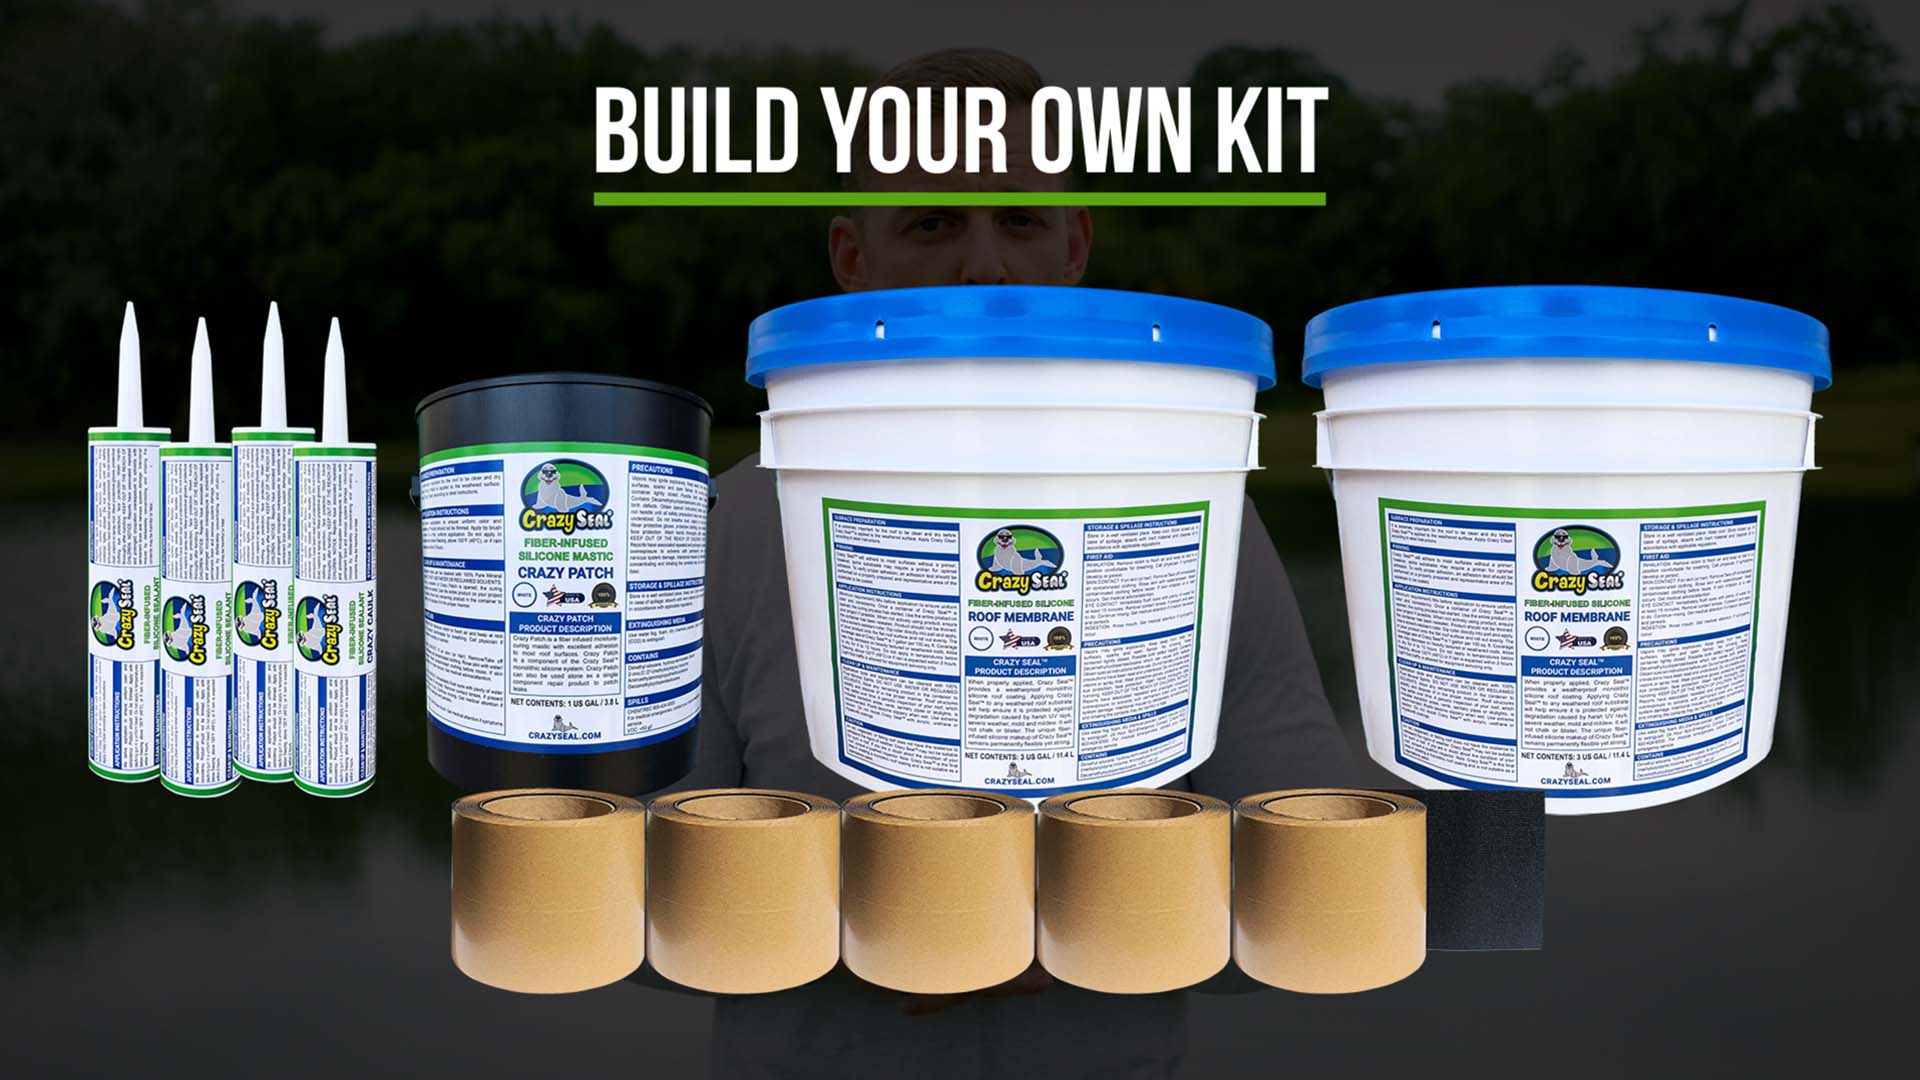 BUILD YOUR OWN KIT